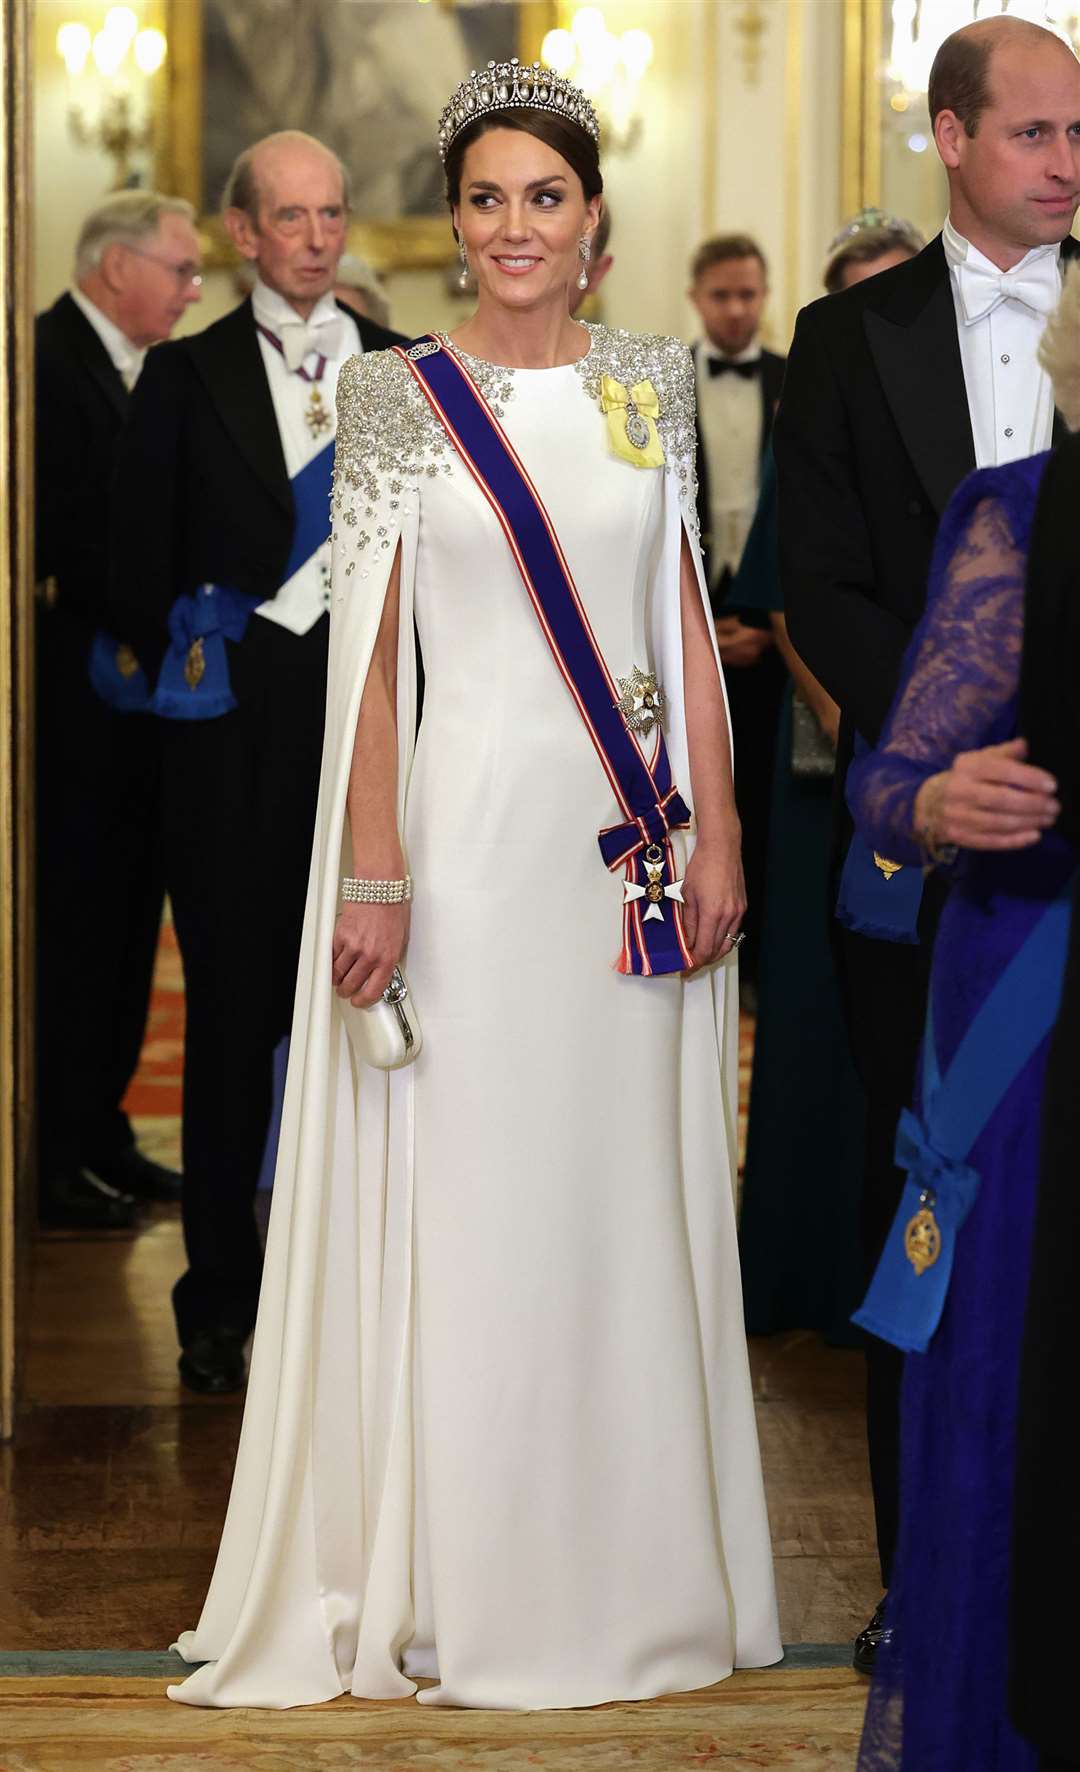 The Princess of Wales during the state banquet at Buckingham Palace, held during the state visit to the UK by President Cyril Ramaphosa of South Africa (Chris Jackson/PA)